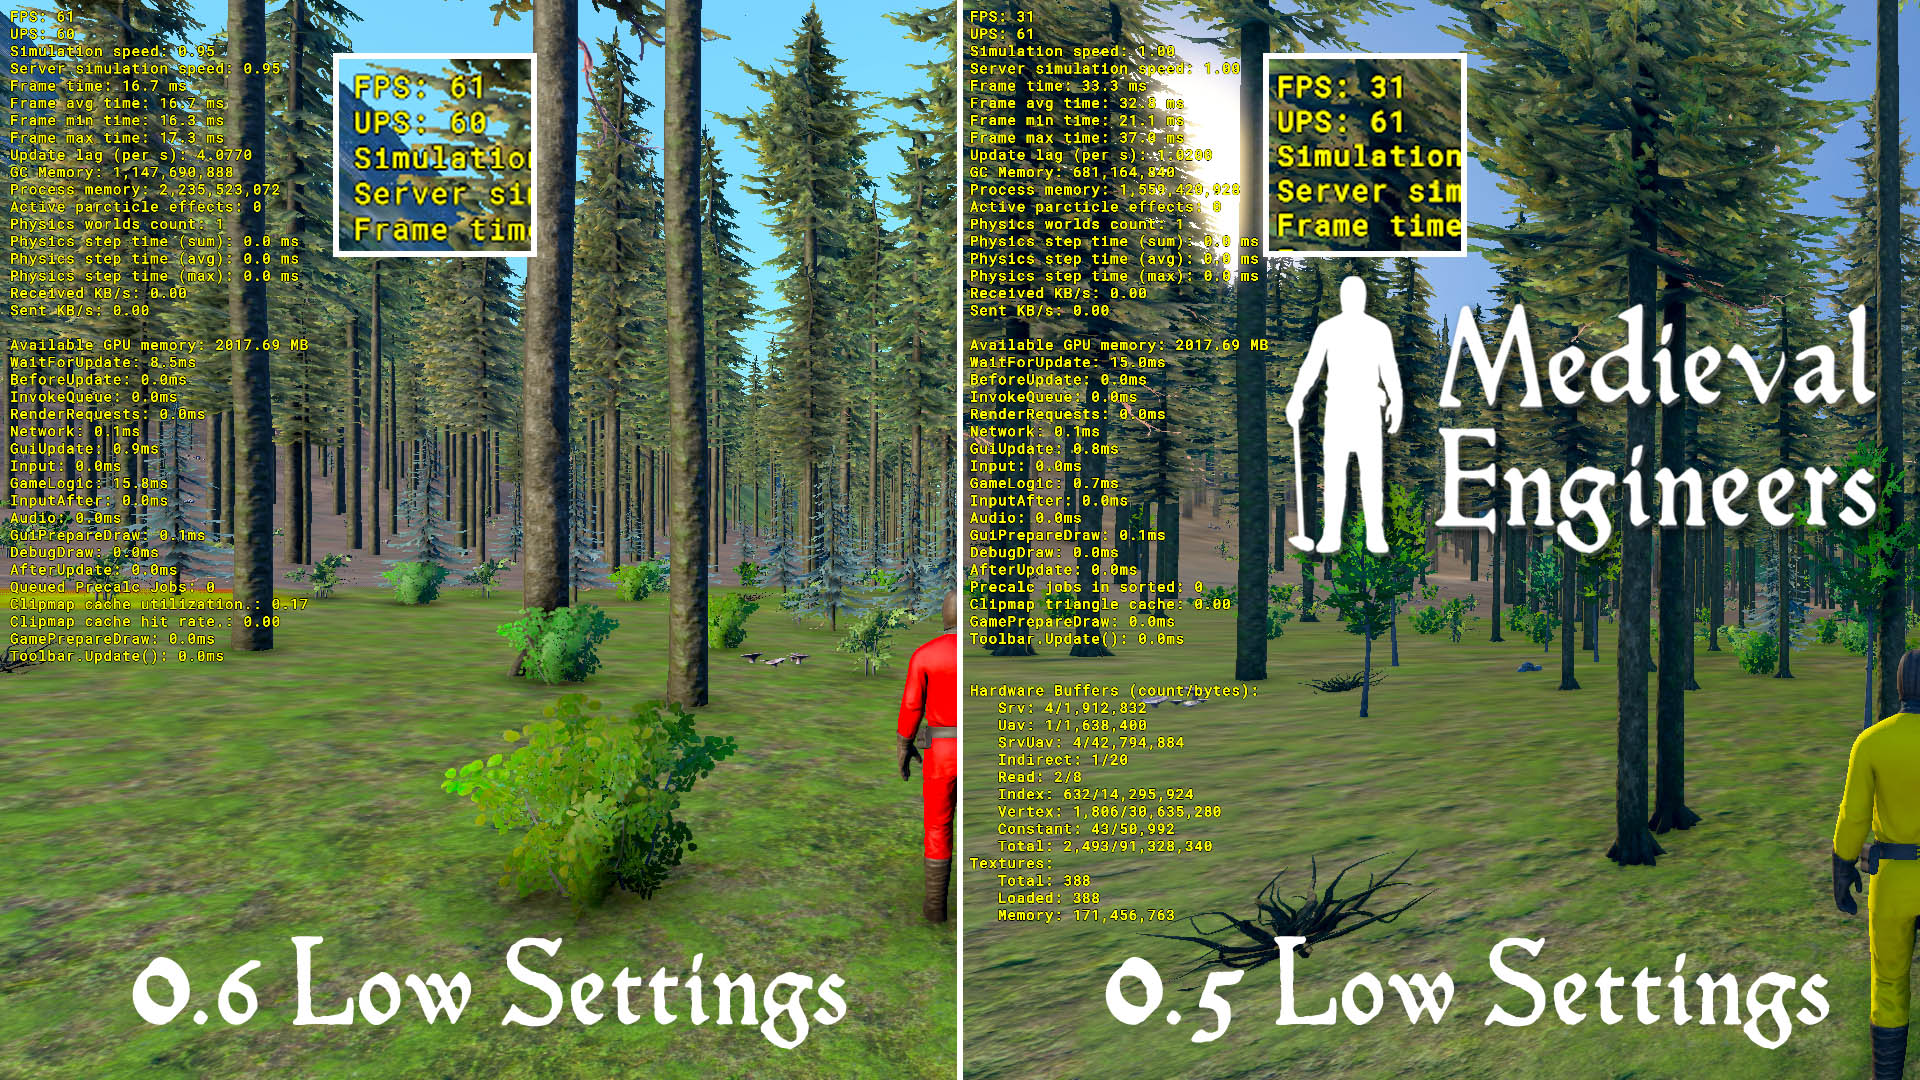 Renderer LowSettingsFPS | Coming soon in 0.6: Improved Experience and Research Quests!